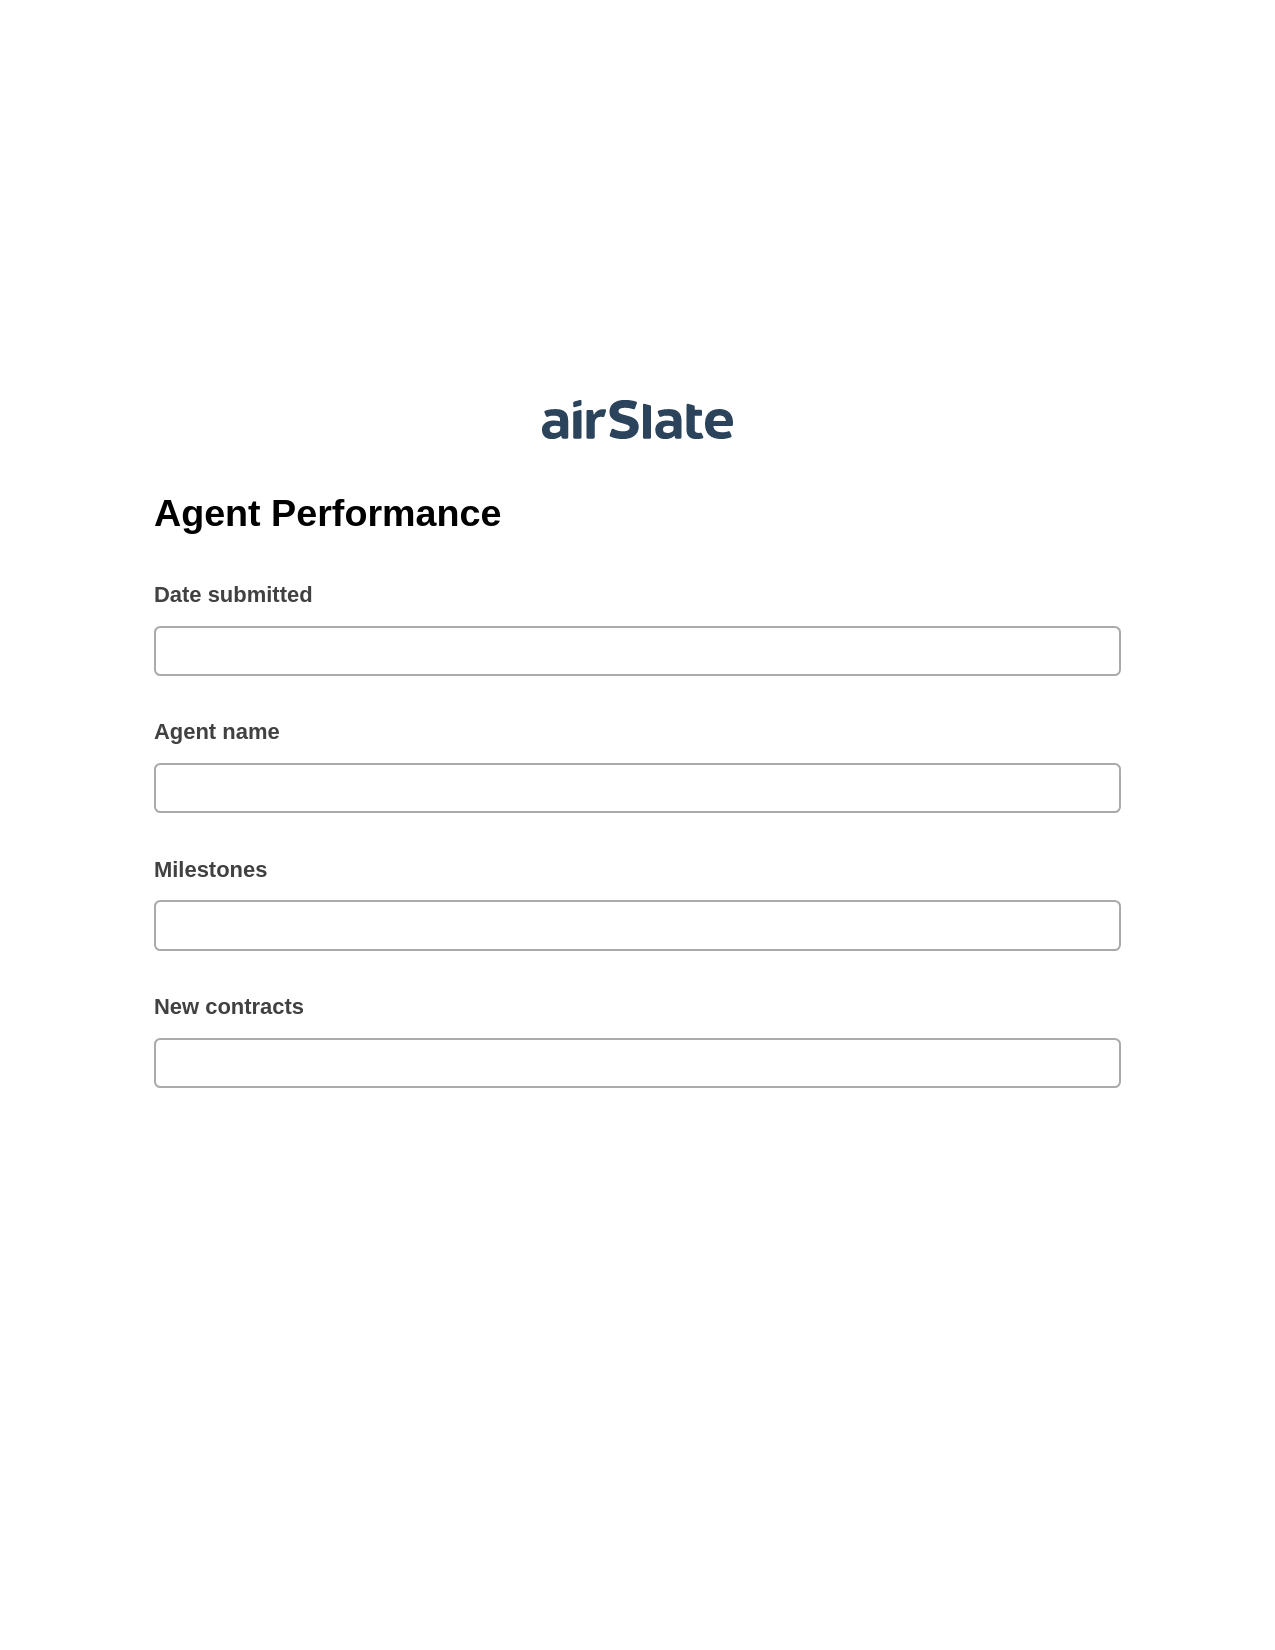 Agent Performance Pre-fill from CSV File Bot, Rename Slate Bot, Export to Excel 365 Bot